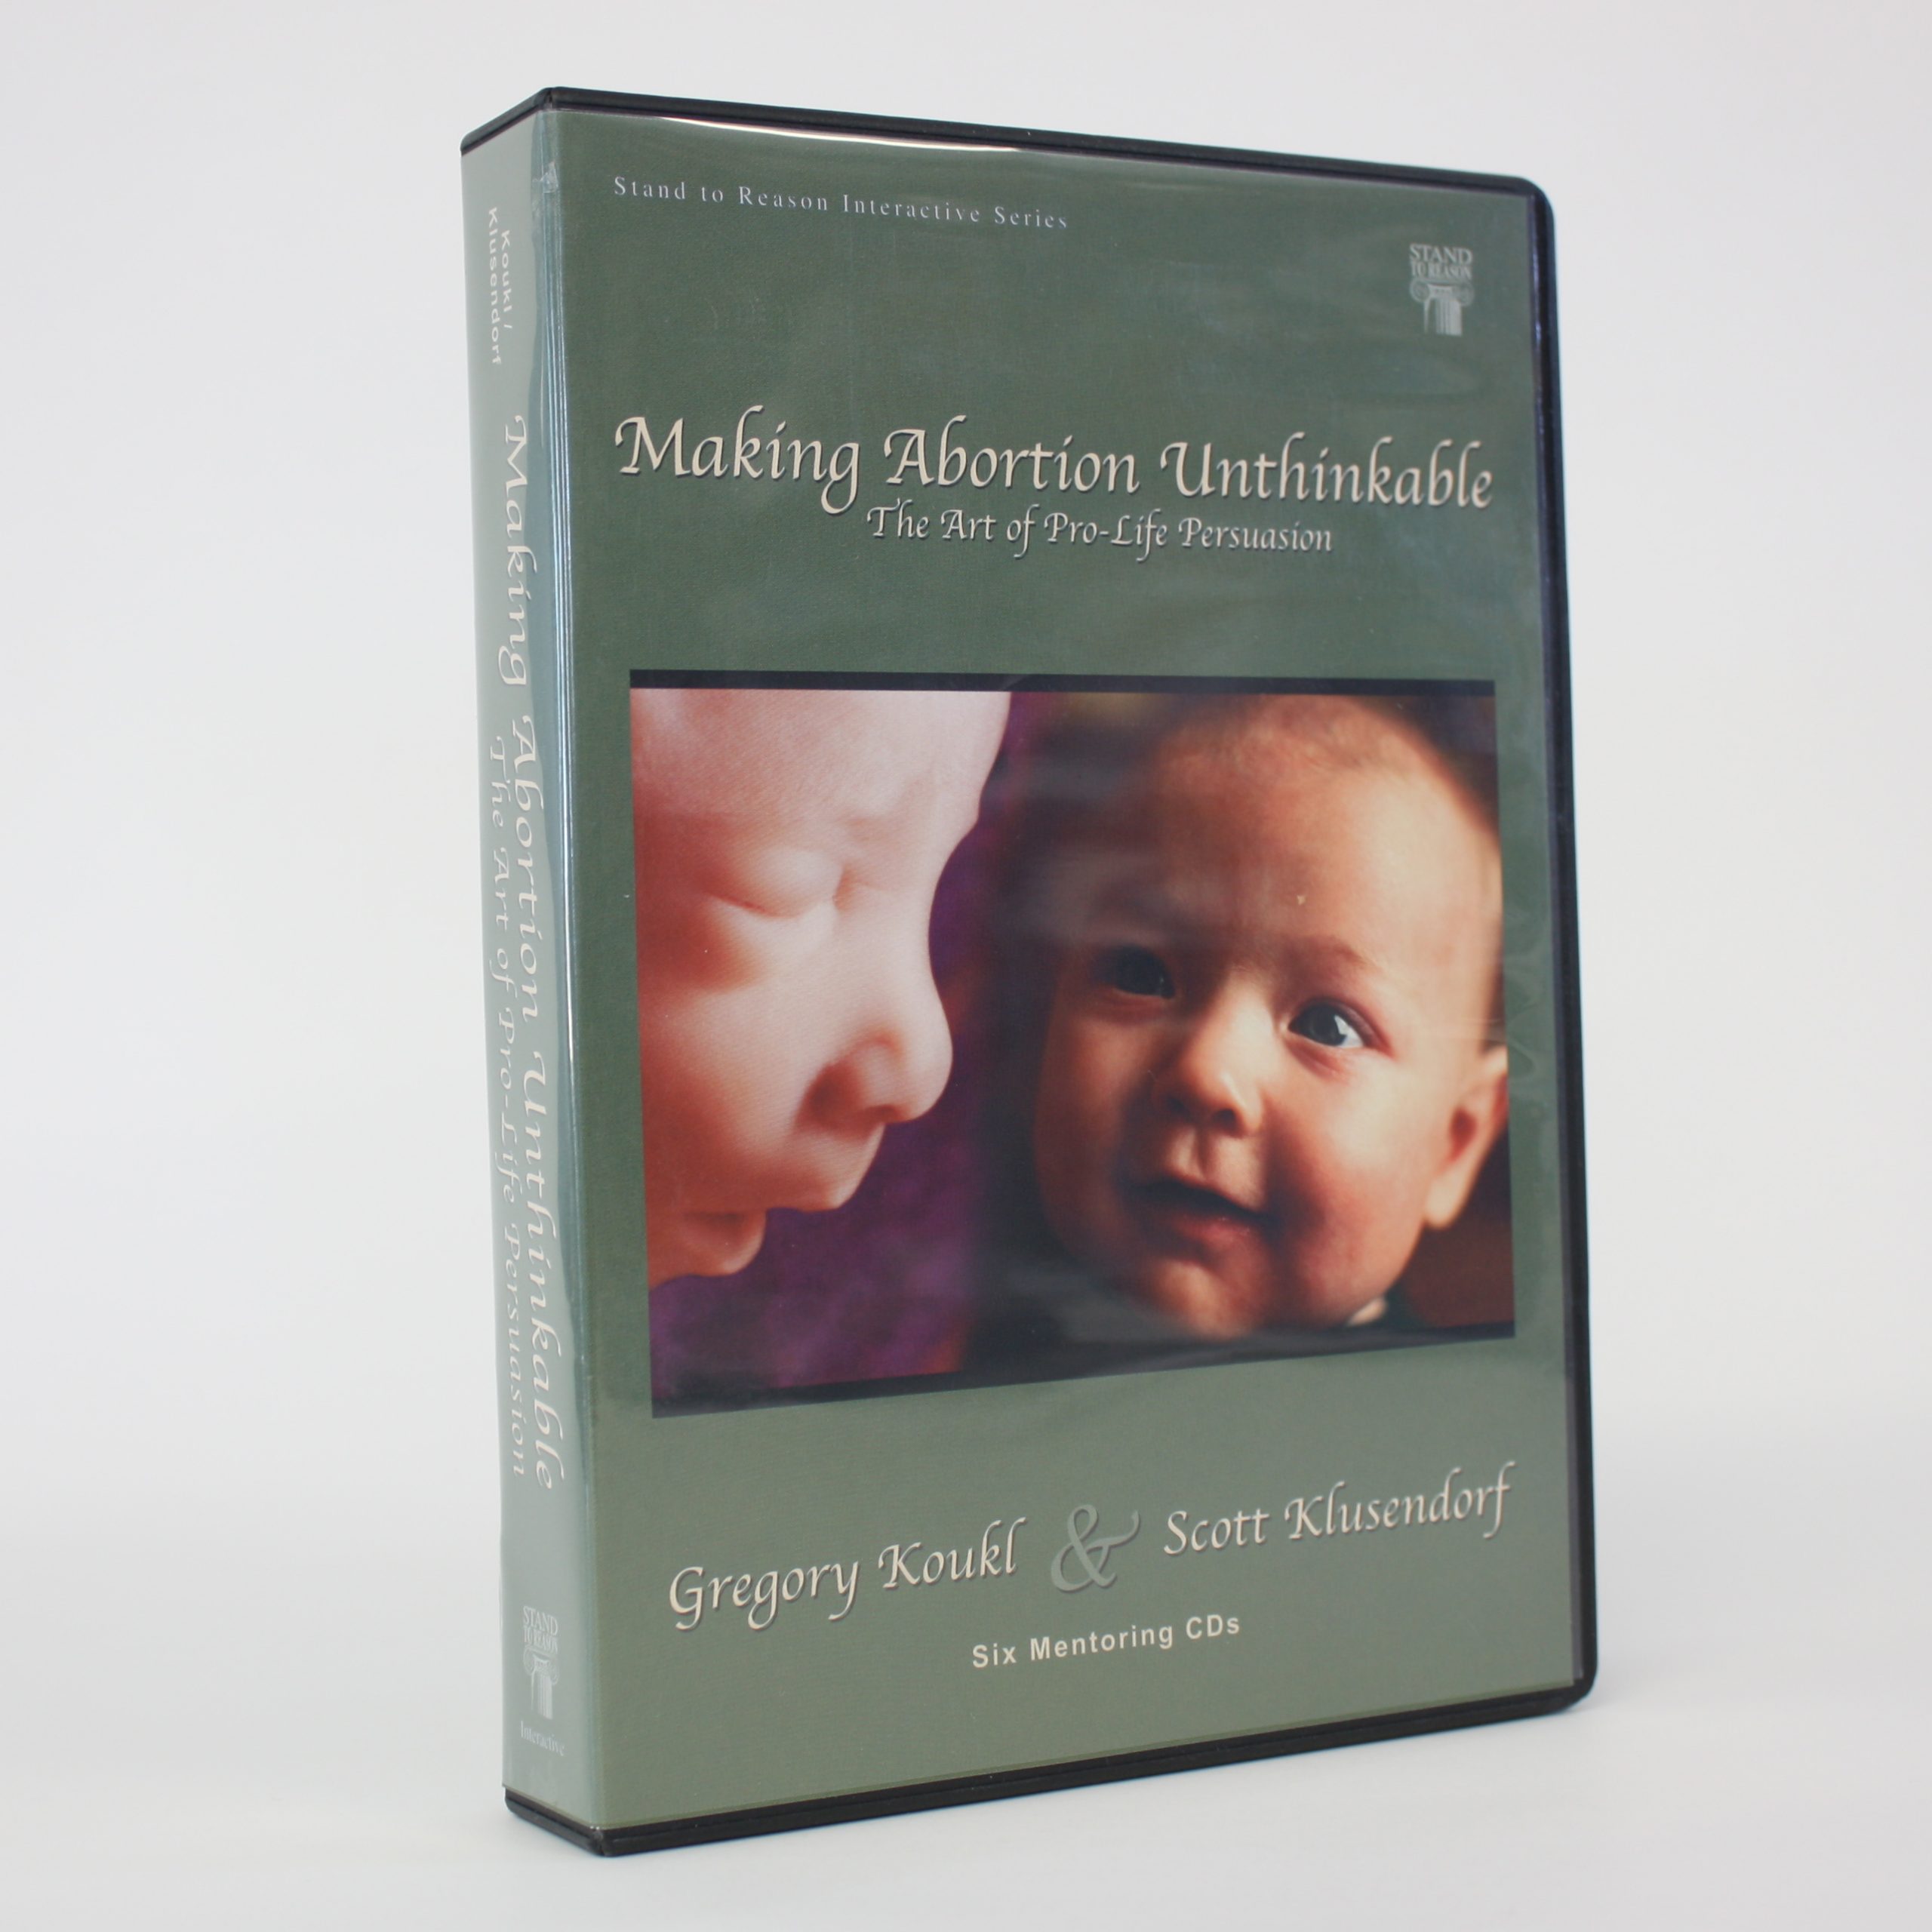 Making Abortion Unthinkable: The Art of Pro-Life Persuasion DVD